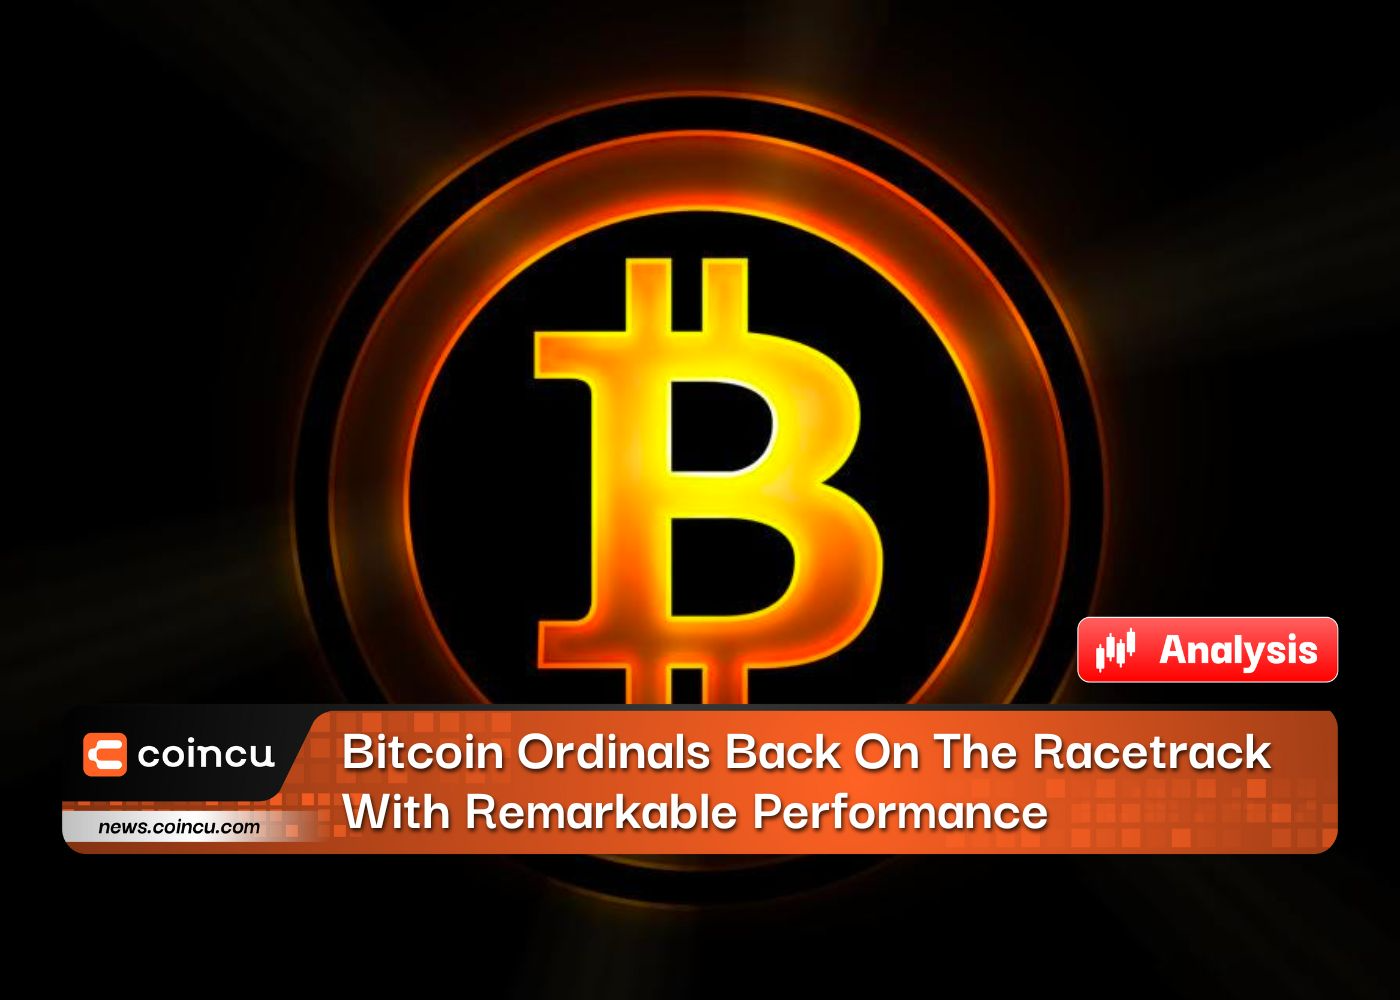 Bitcoin Ordinals Back On The Racetrack With Remarkable Performance